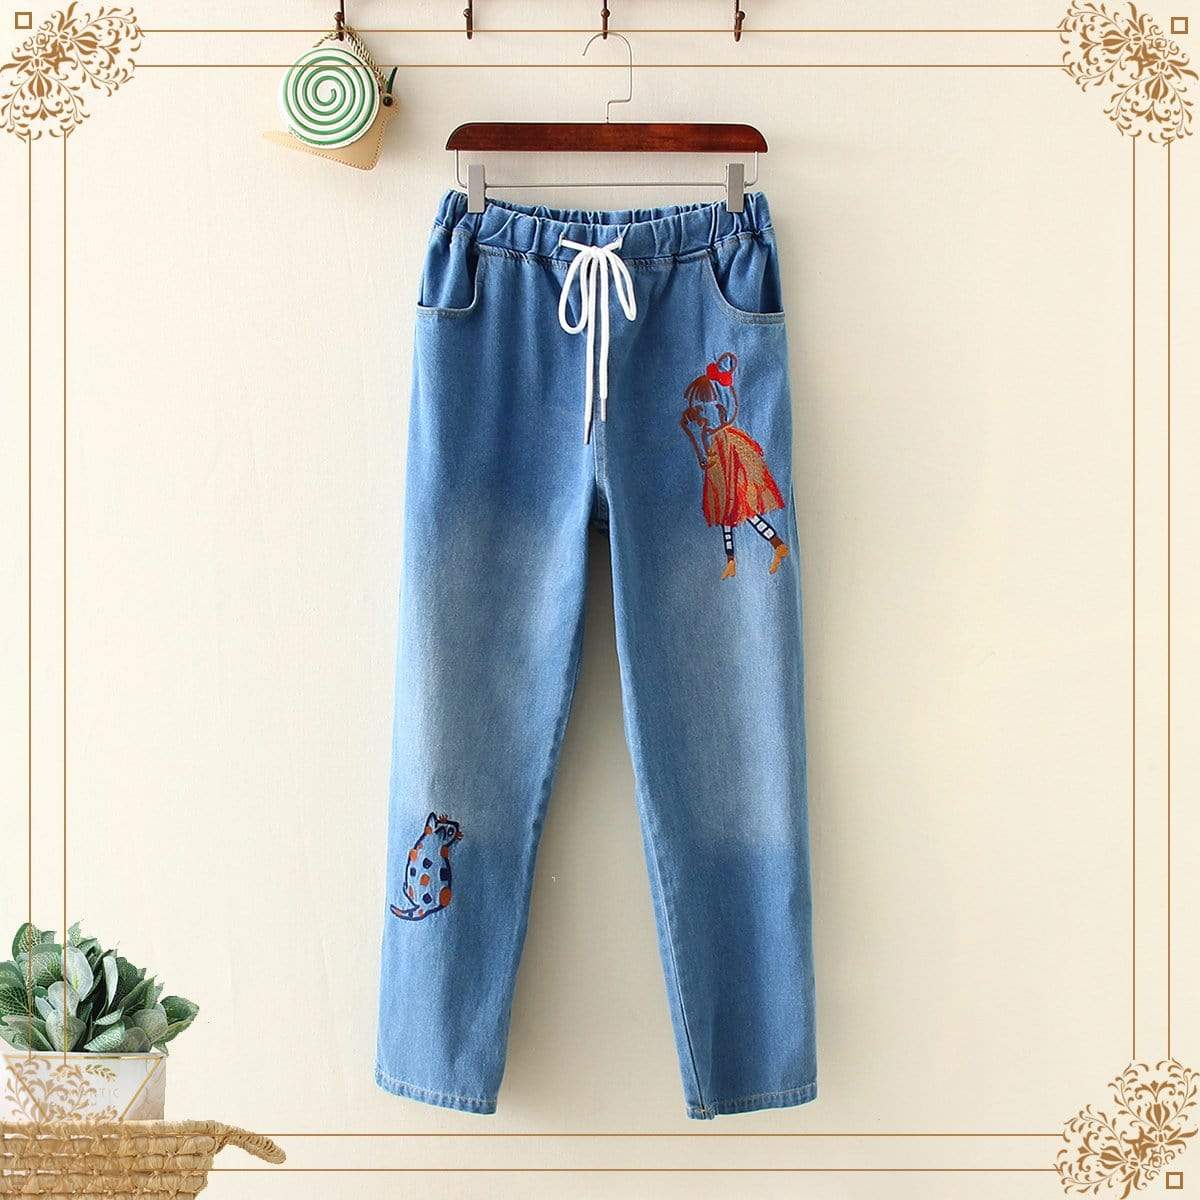 Kawaiifashion Women's Sweet Cat And Girl Embroidered Elastic Jeans